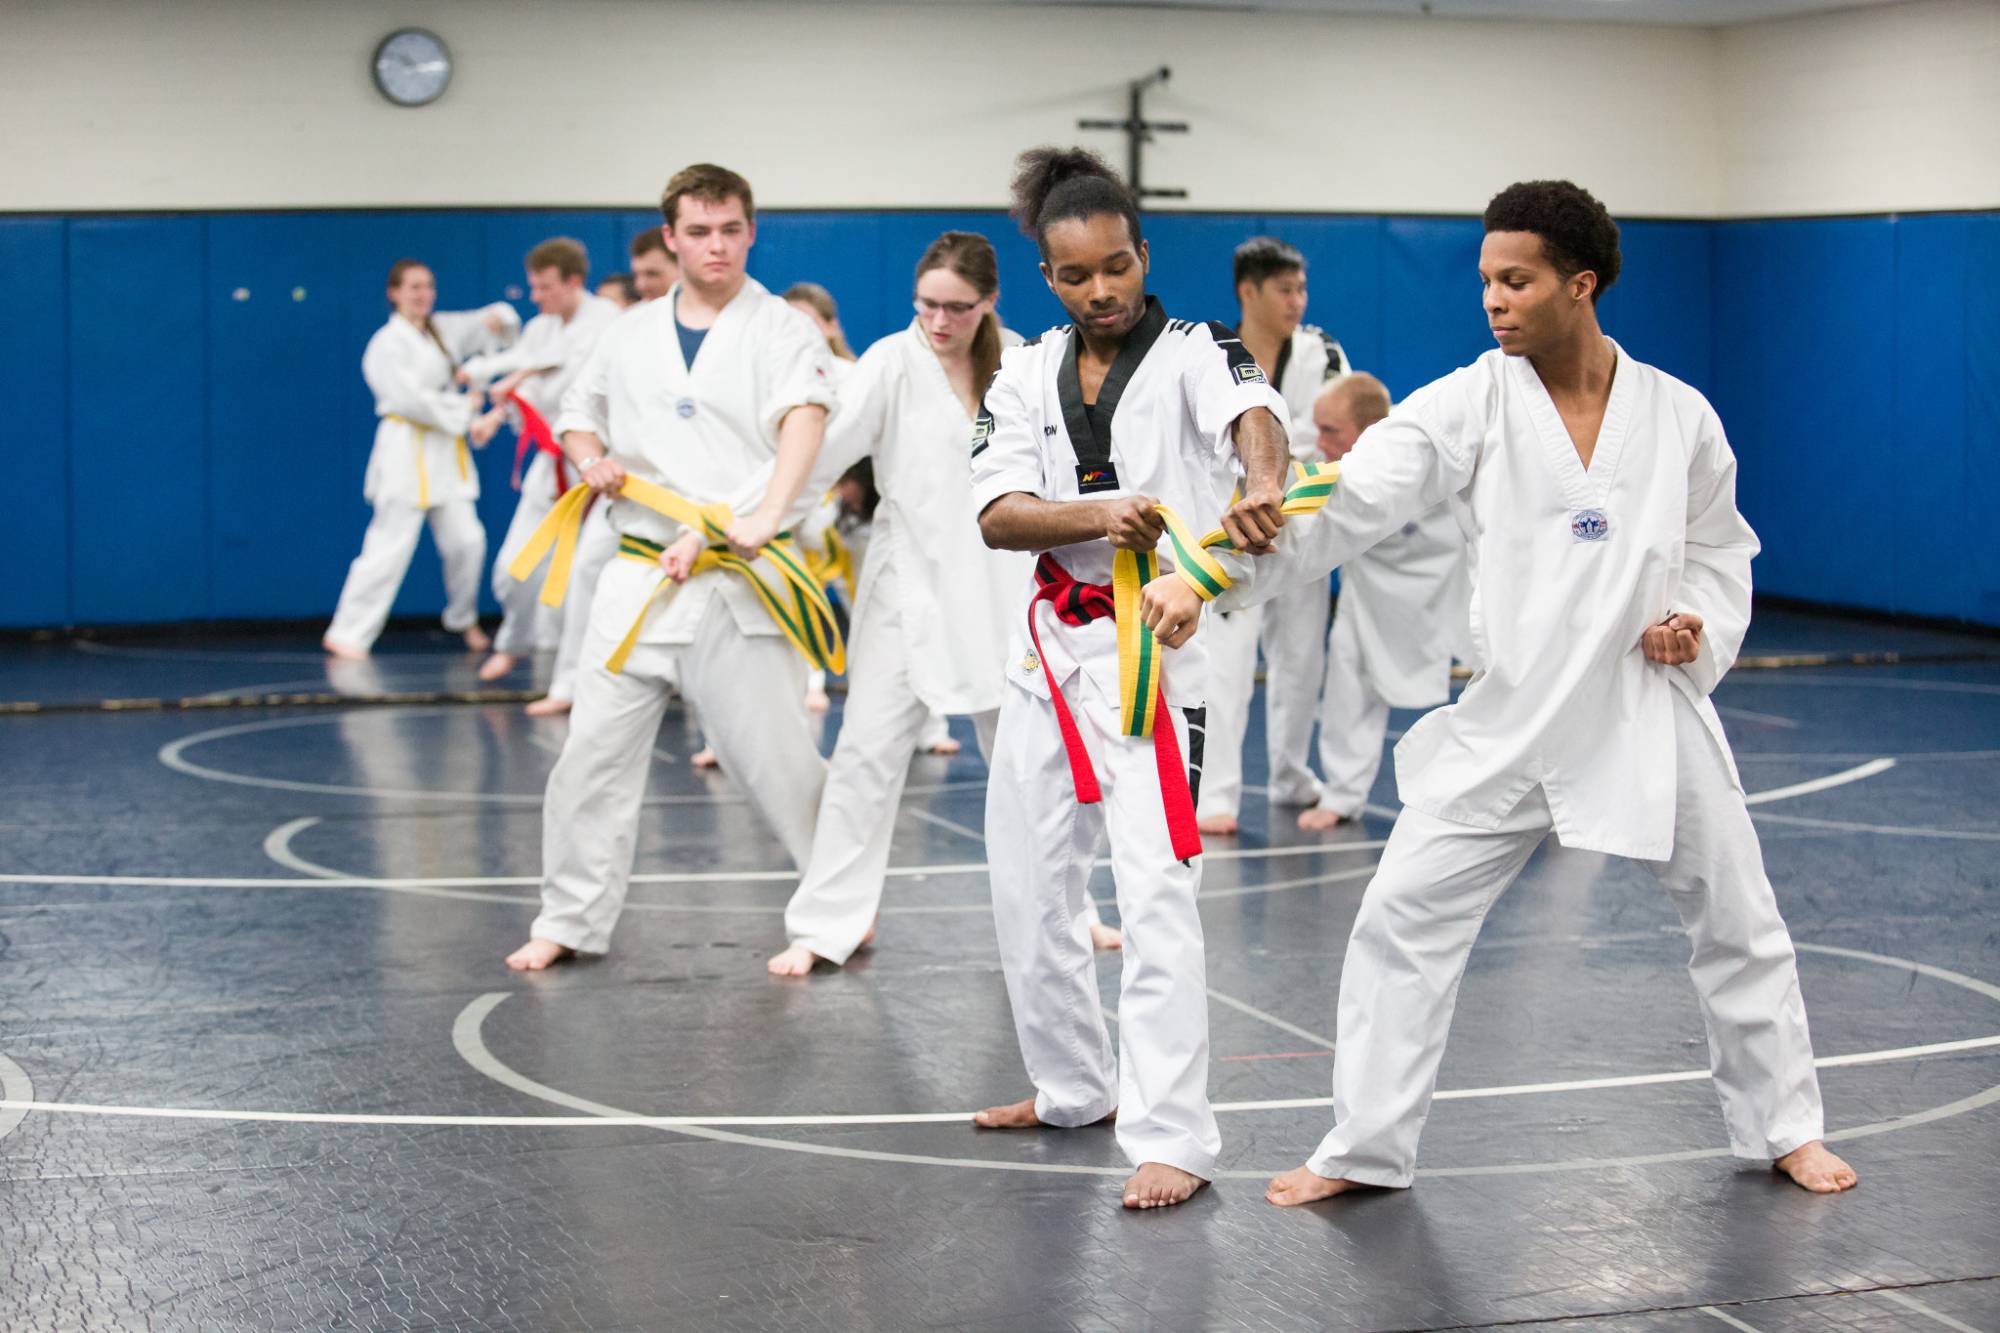 Students learning Karate